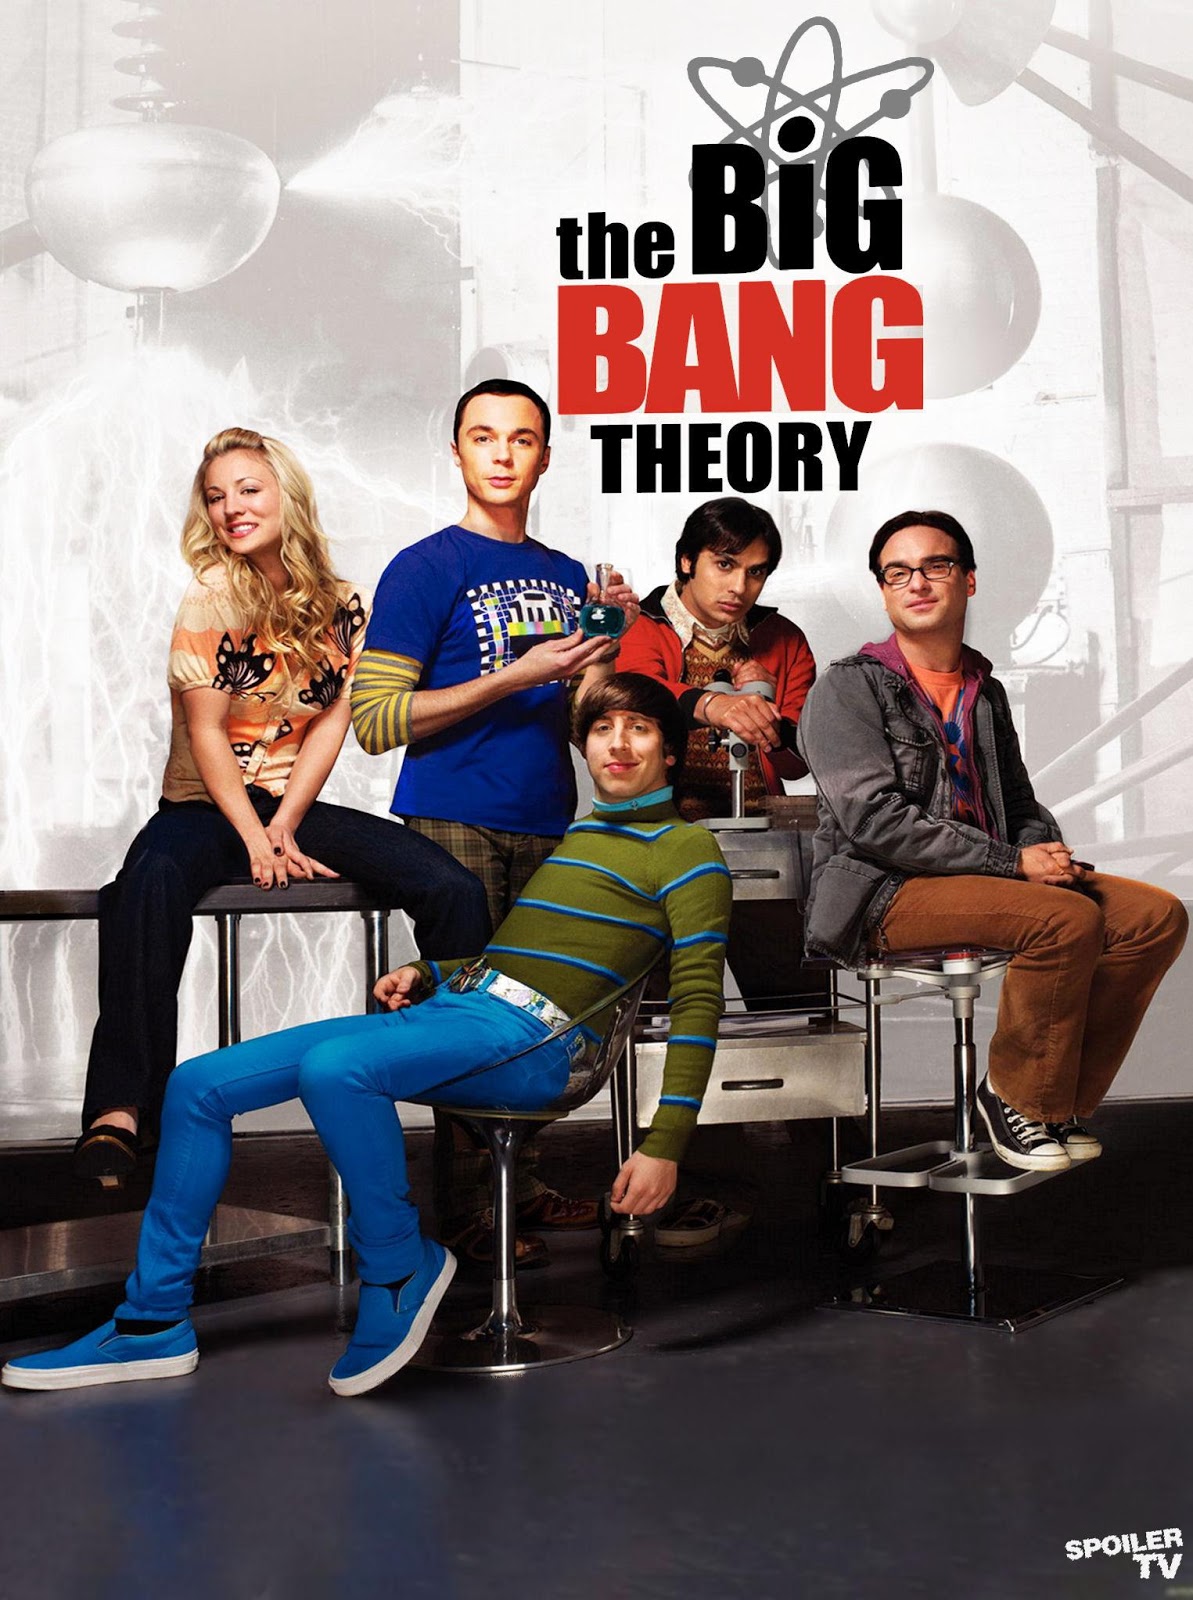 The Big Bang Theory Poster Gallery1 | Tv Series Posters and Cast1193 x 1600